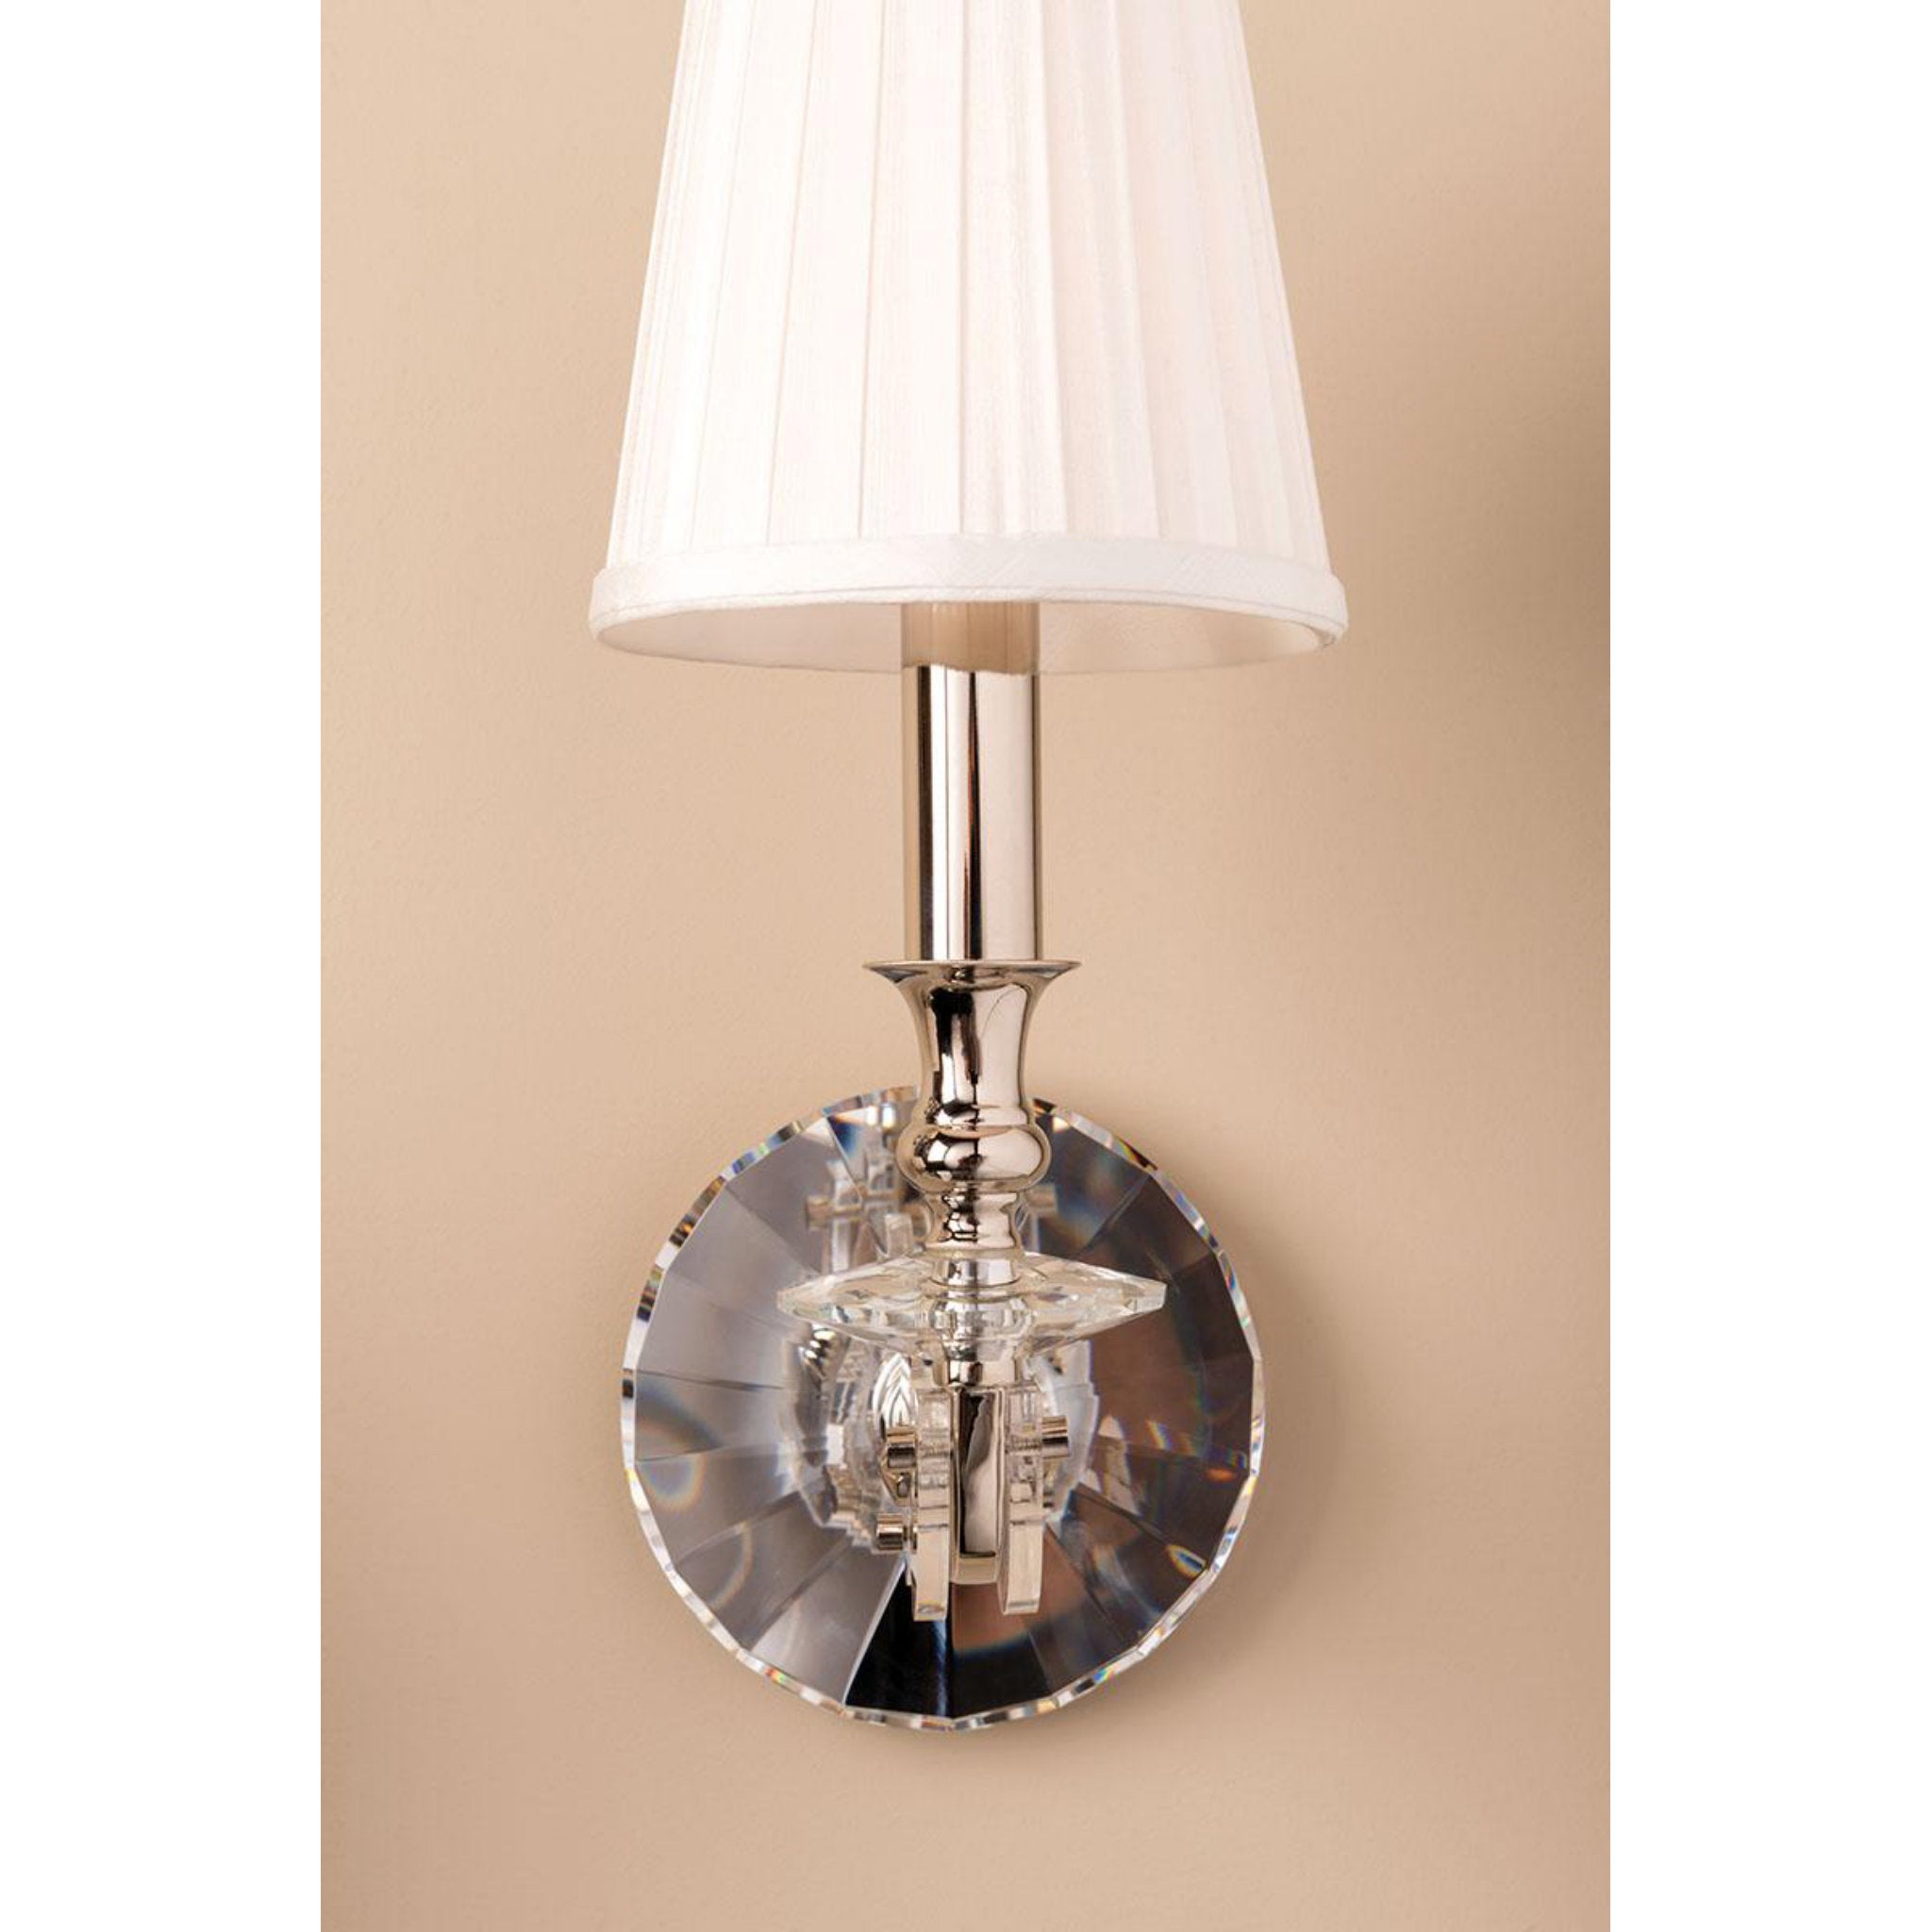 Lapeer 1 Light Wall Sconce in Aged Brass